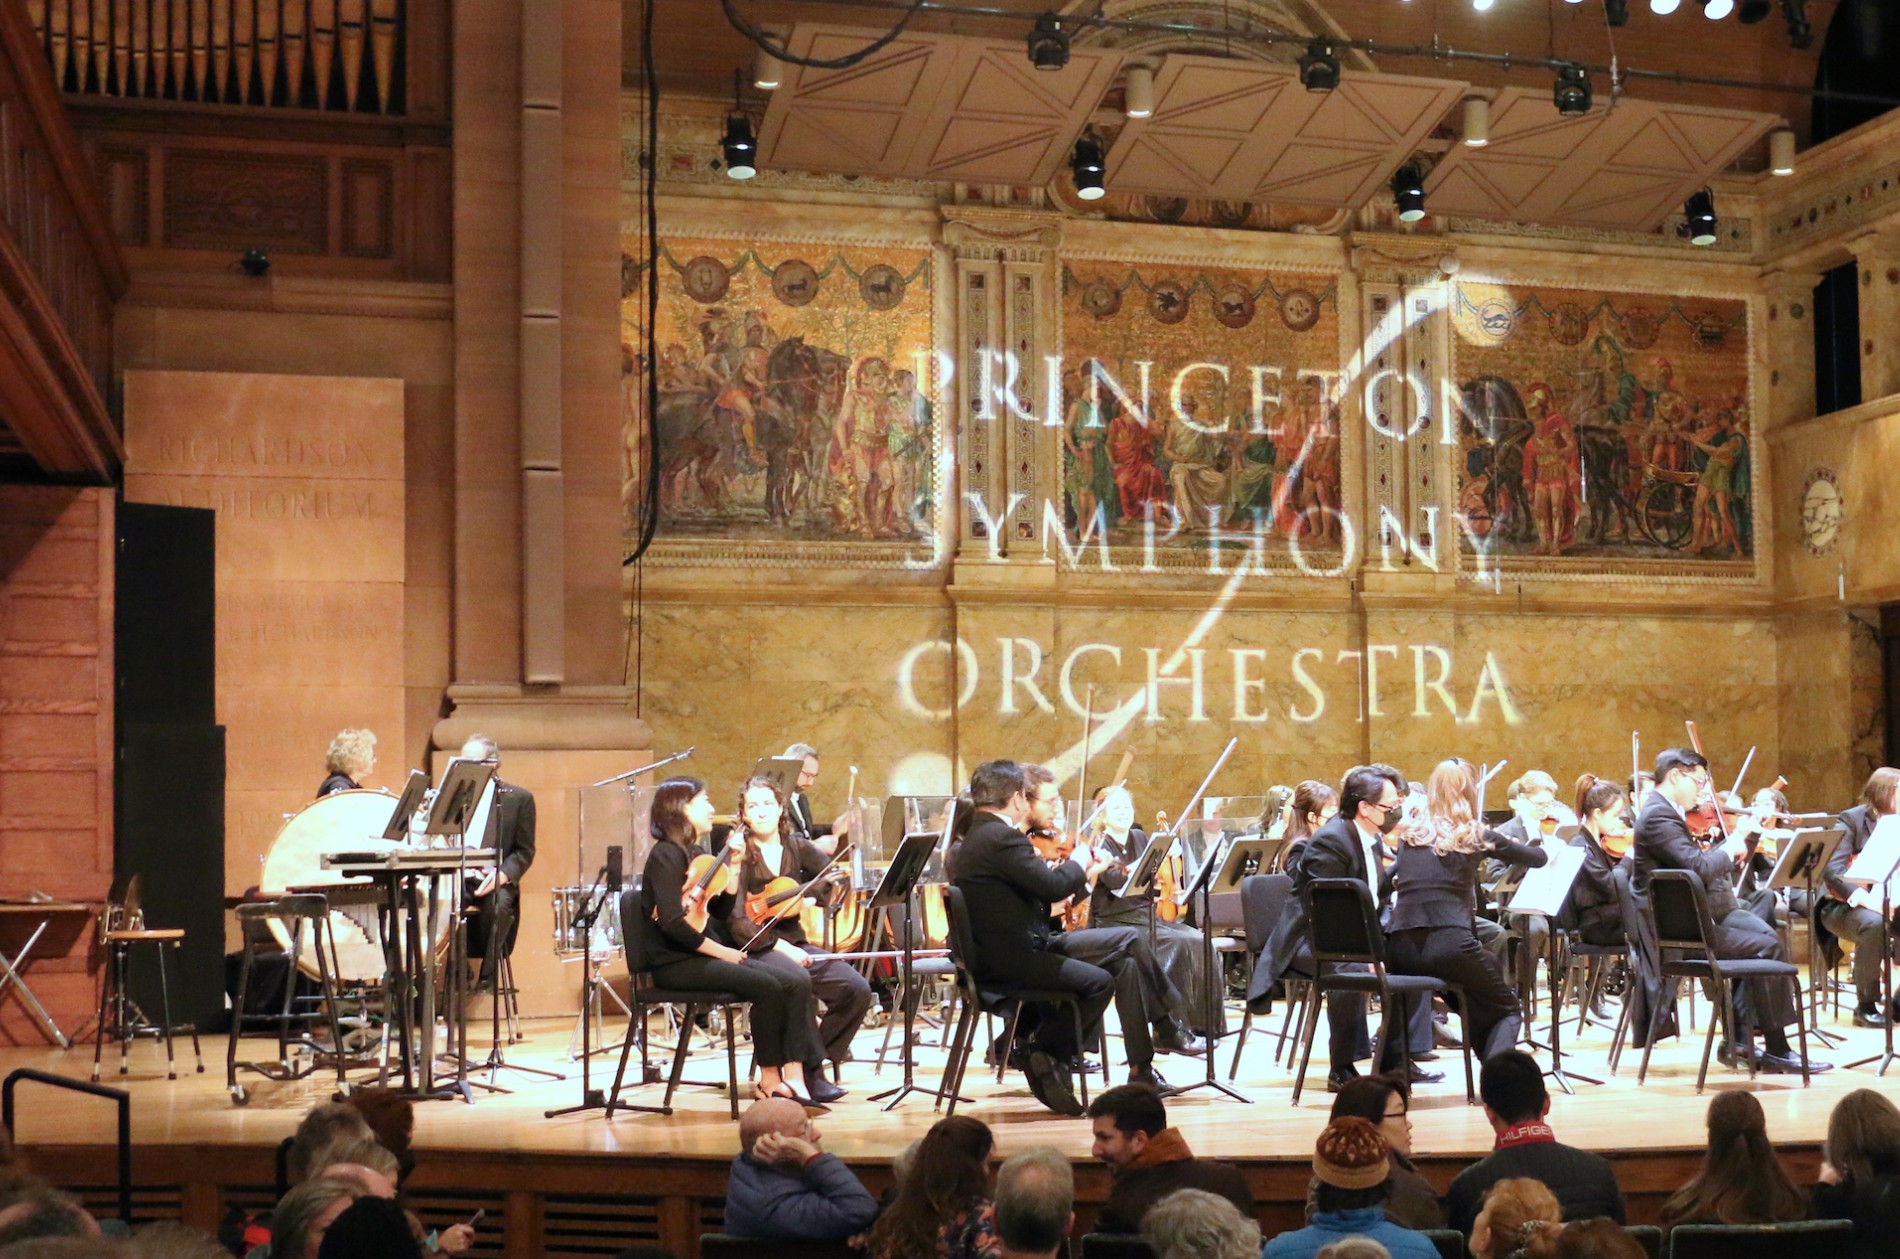 Princeton Symphony Orchestra musicians on stage with PSO logo projected on mosaic wall behind